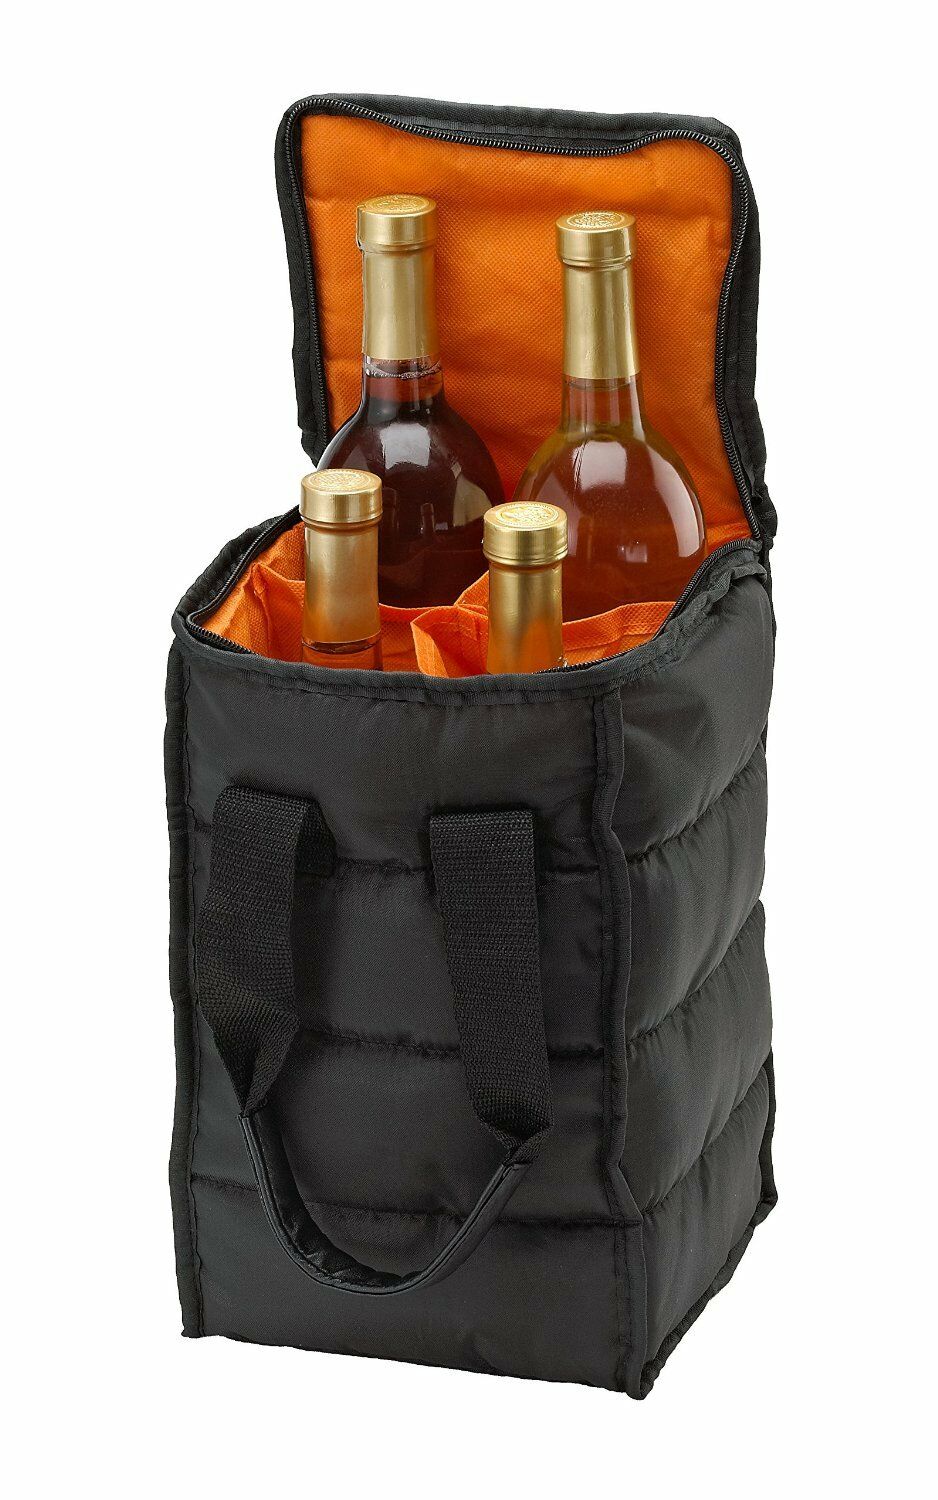 Wine Carrier Tote Bag - Carry Up To 4 Bottles Of Wine To Beach Or Picnic.